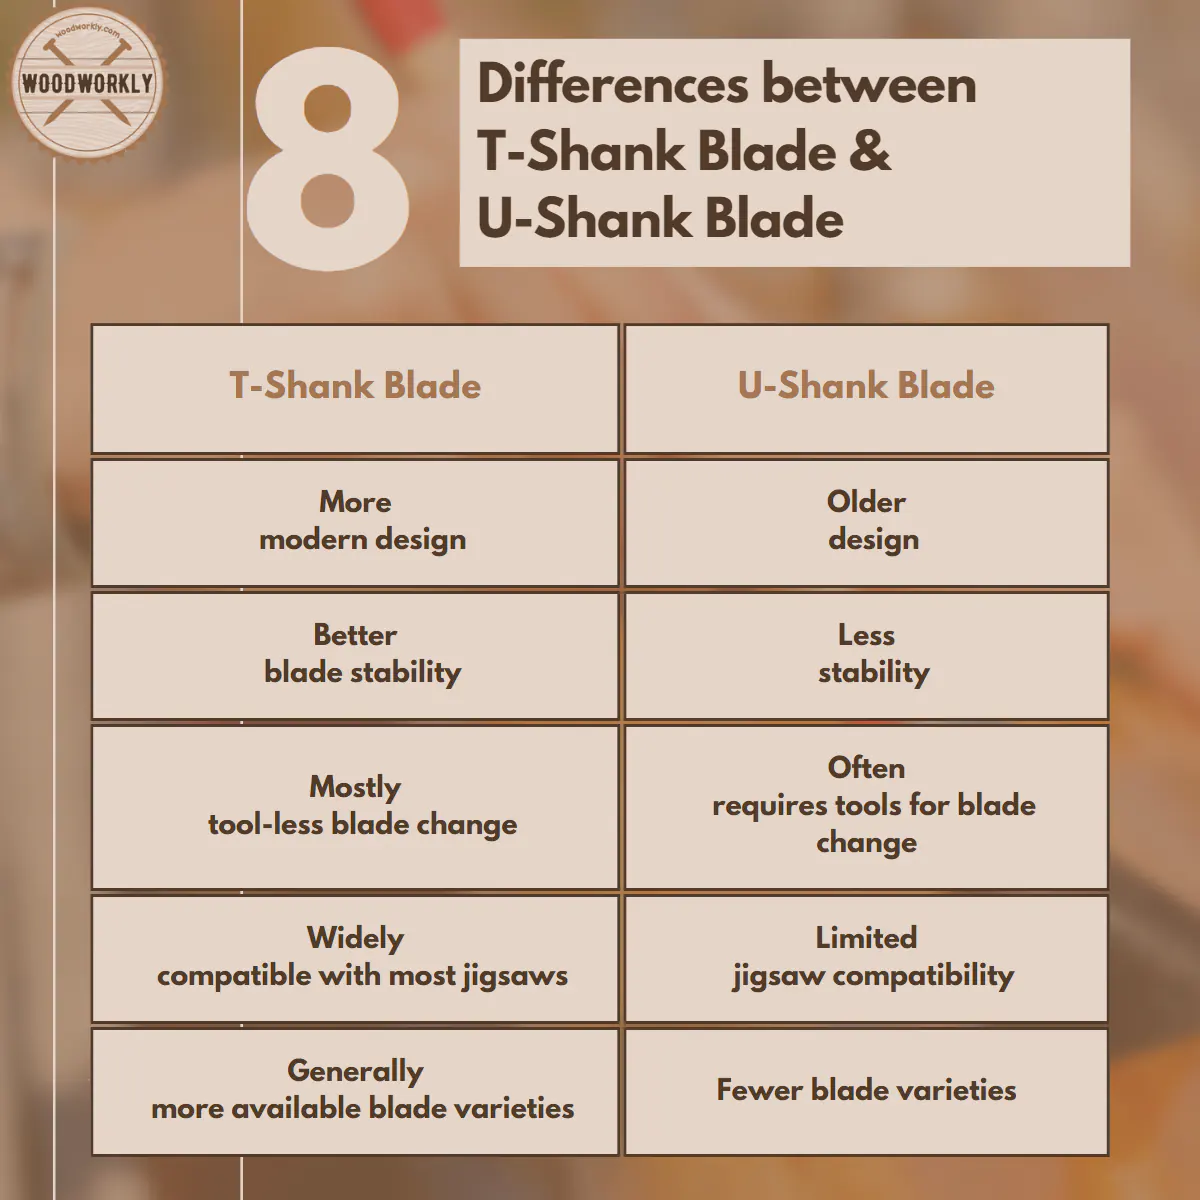 Differences between T-Shank Blade and U-Shank Blade